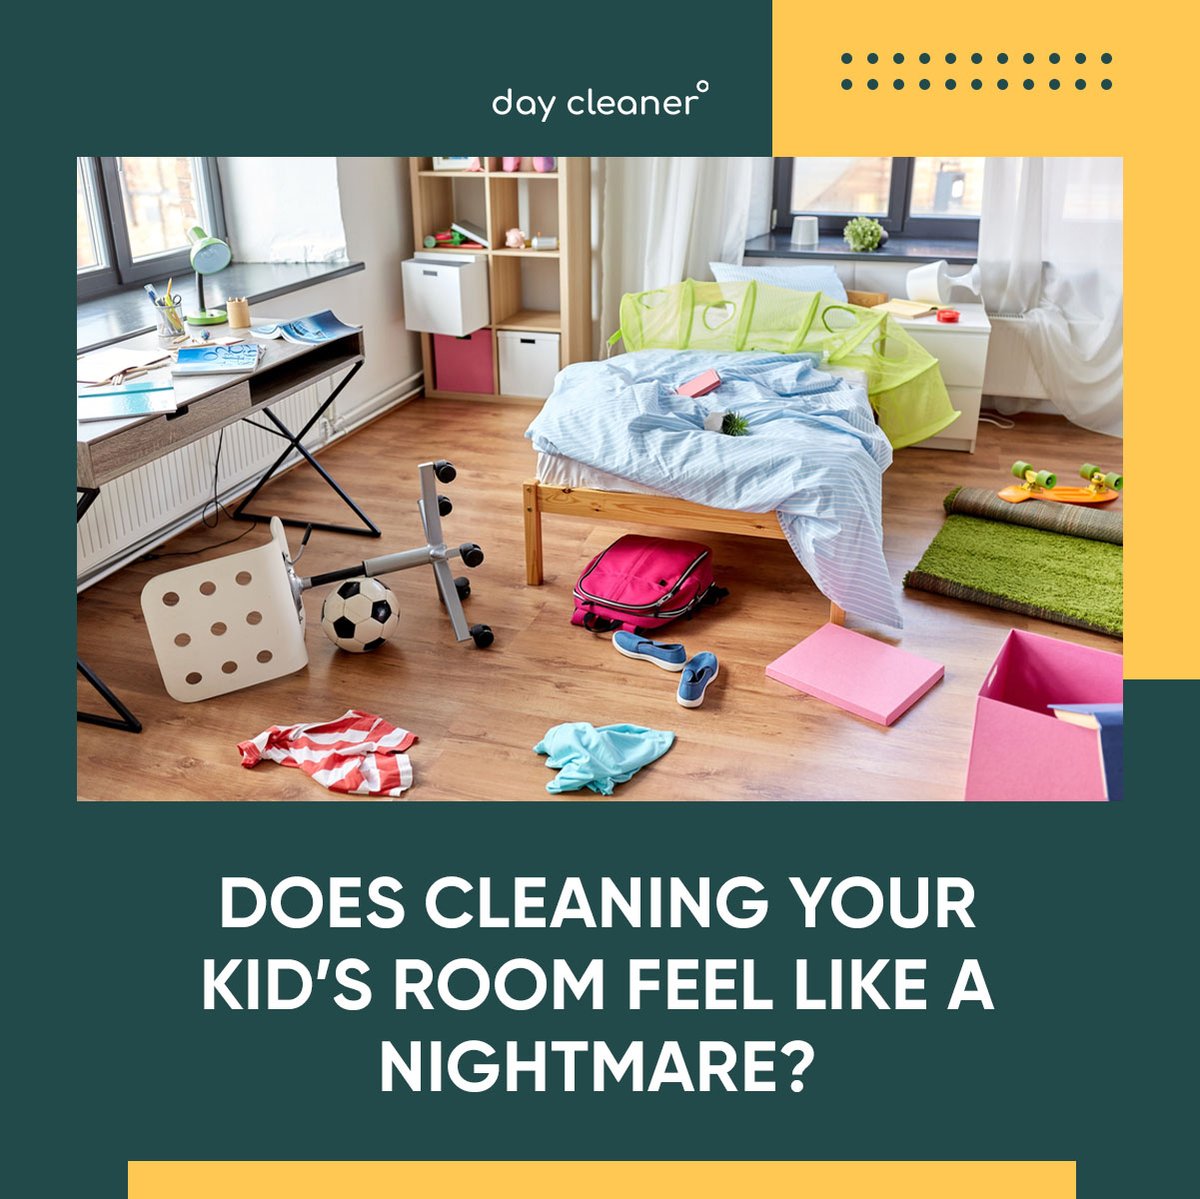 In a room shared by siblings, mess is likely to get out of control most frequently. Cleaning their room can certainly feel like a battle.

daycleaner.com

#cleanhome #dubaicleaning #dubaicleaners #generalcleaningdubai #deepcleaningdubai #cleanhouse #uae #daycleaner